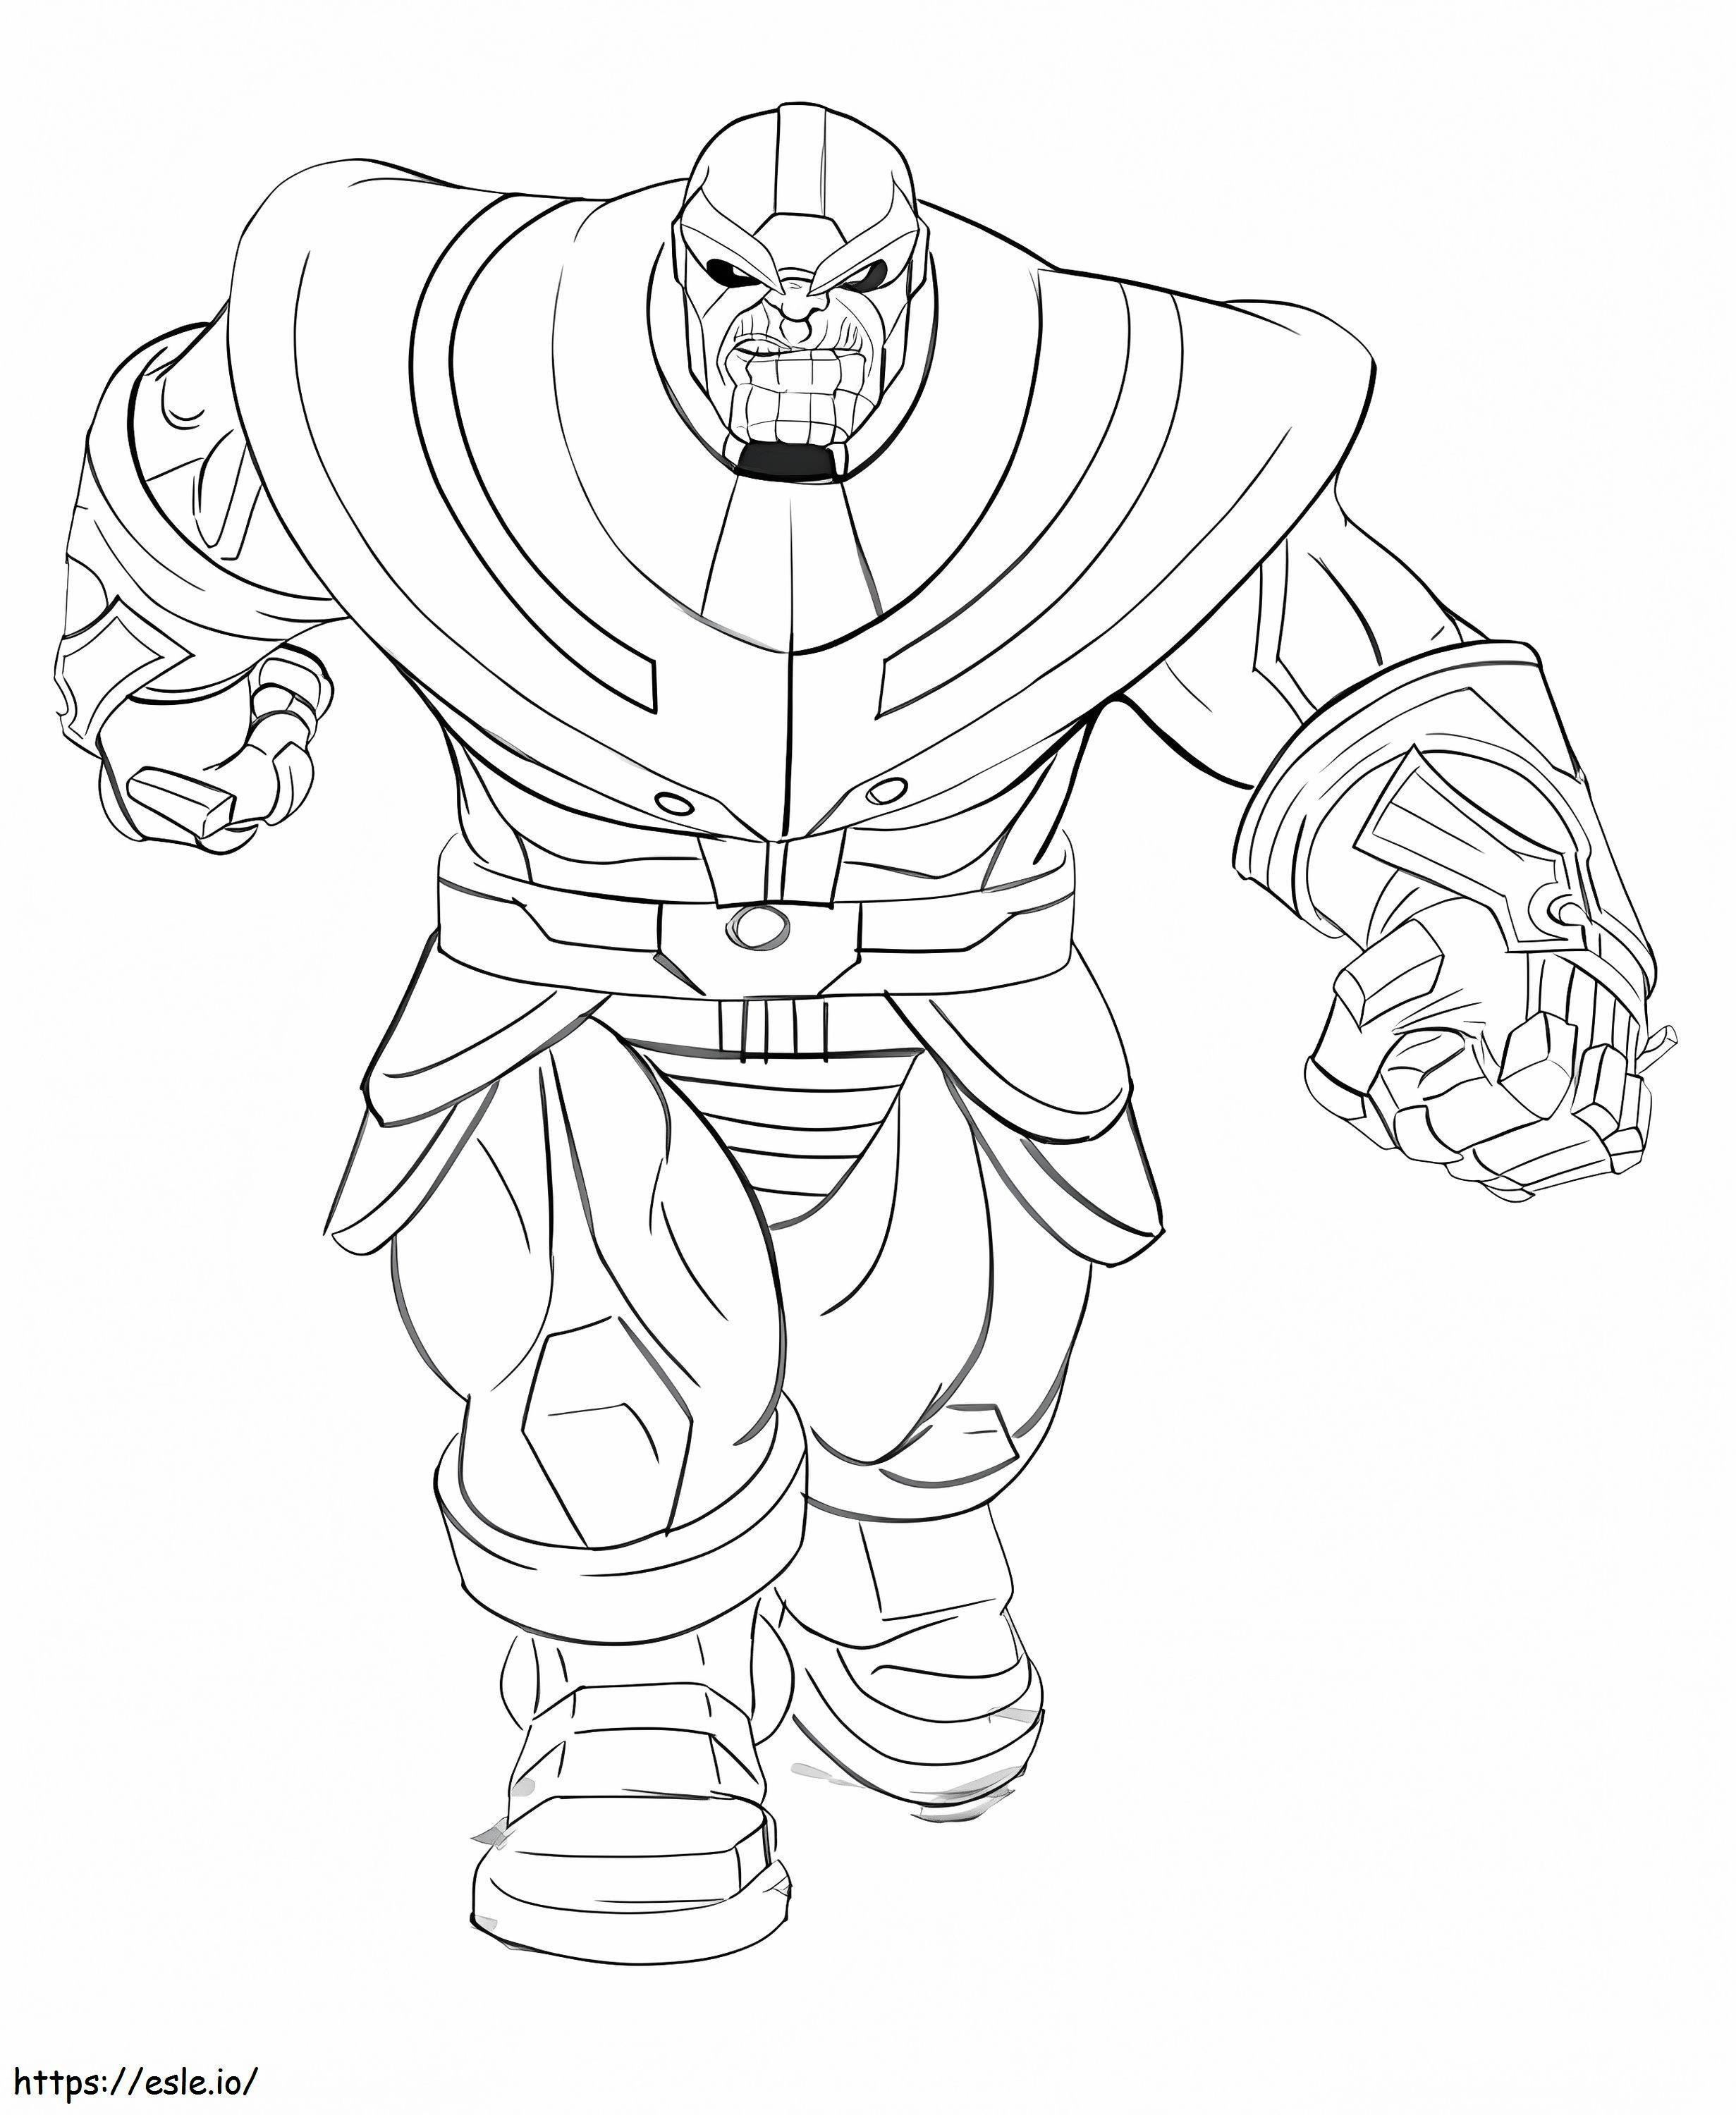 1529378819 34 coloring page